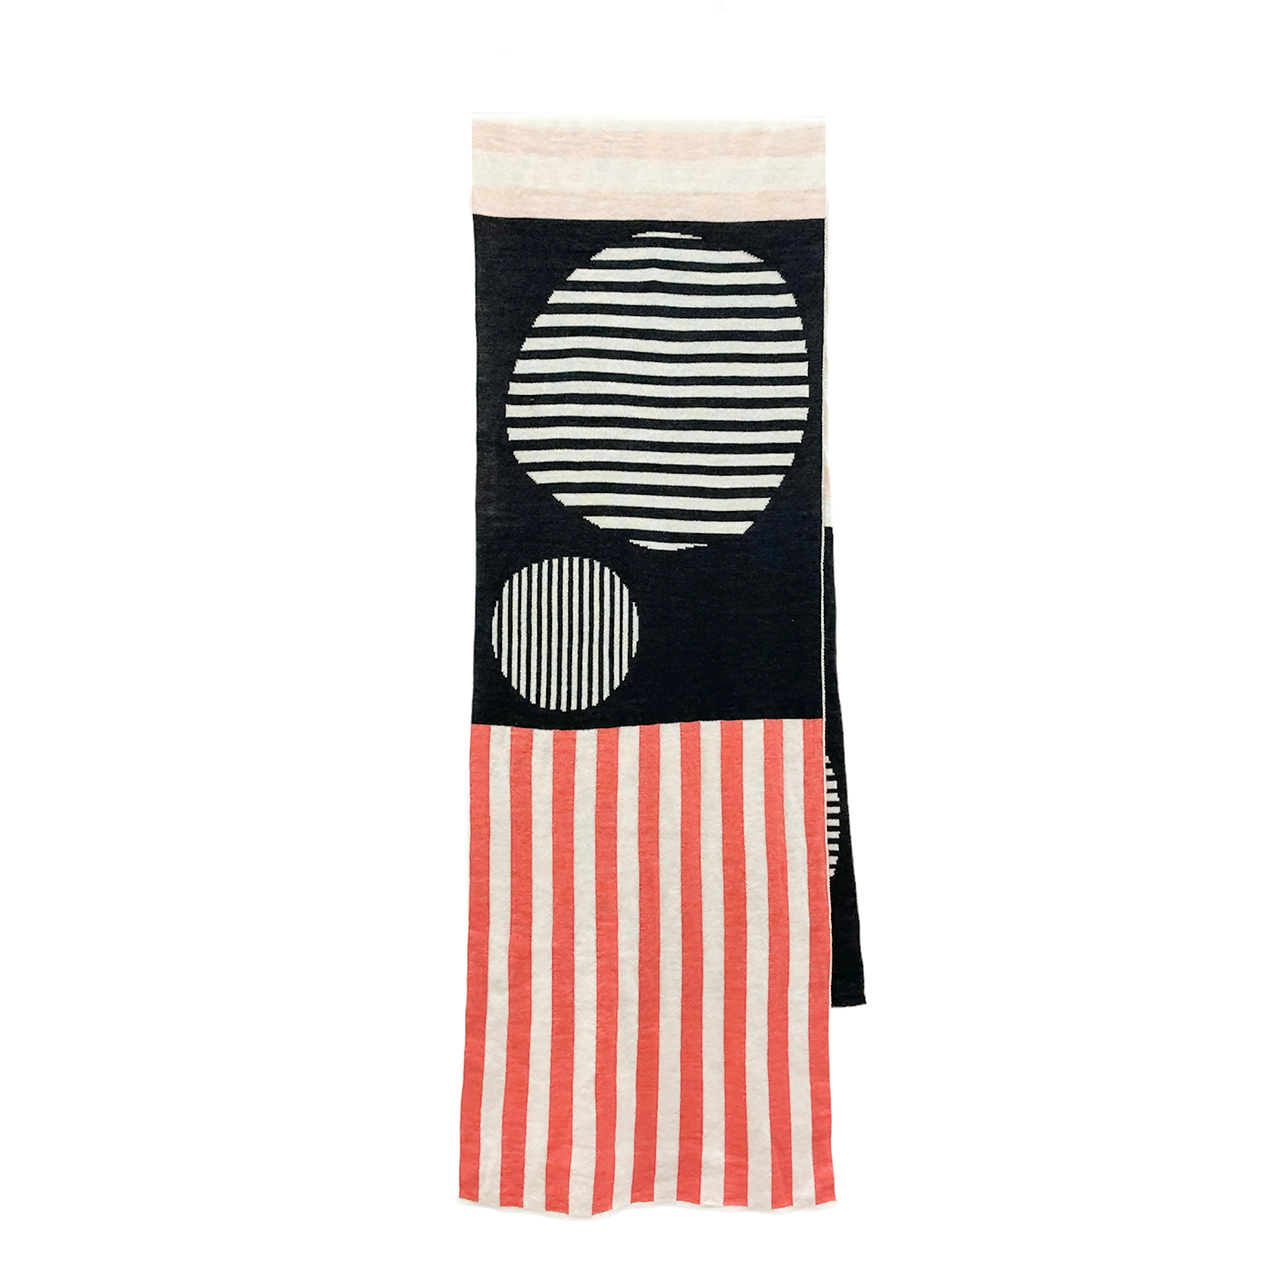 Dowse Diller Striped Scarf - Pink